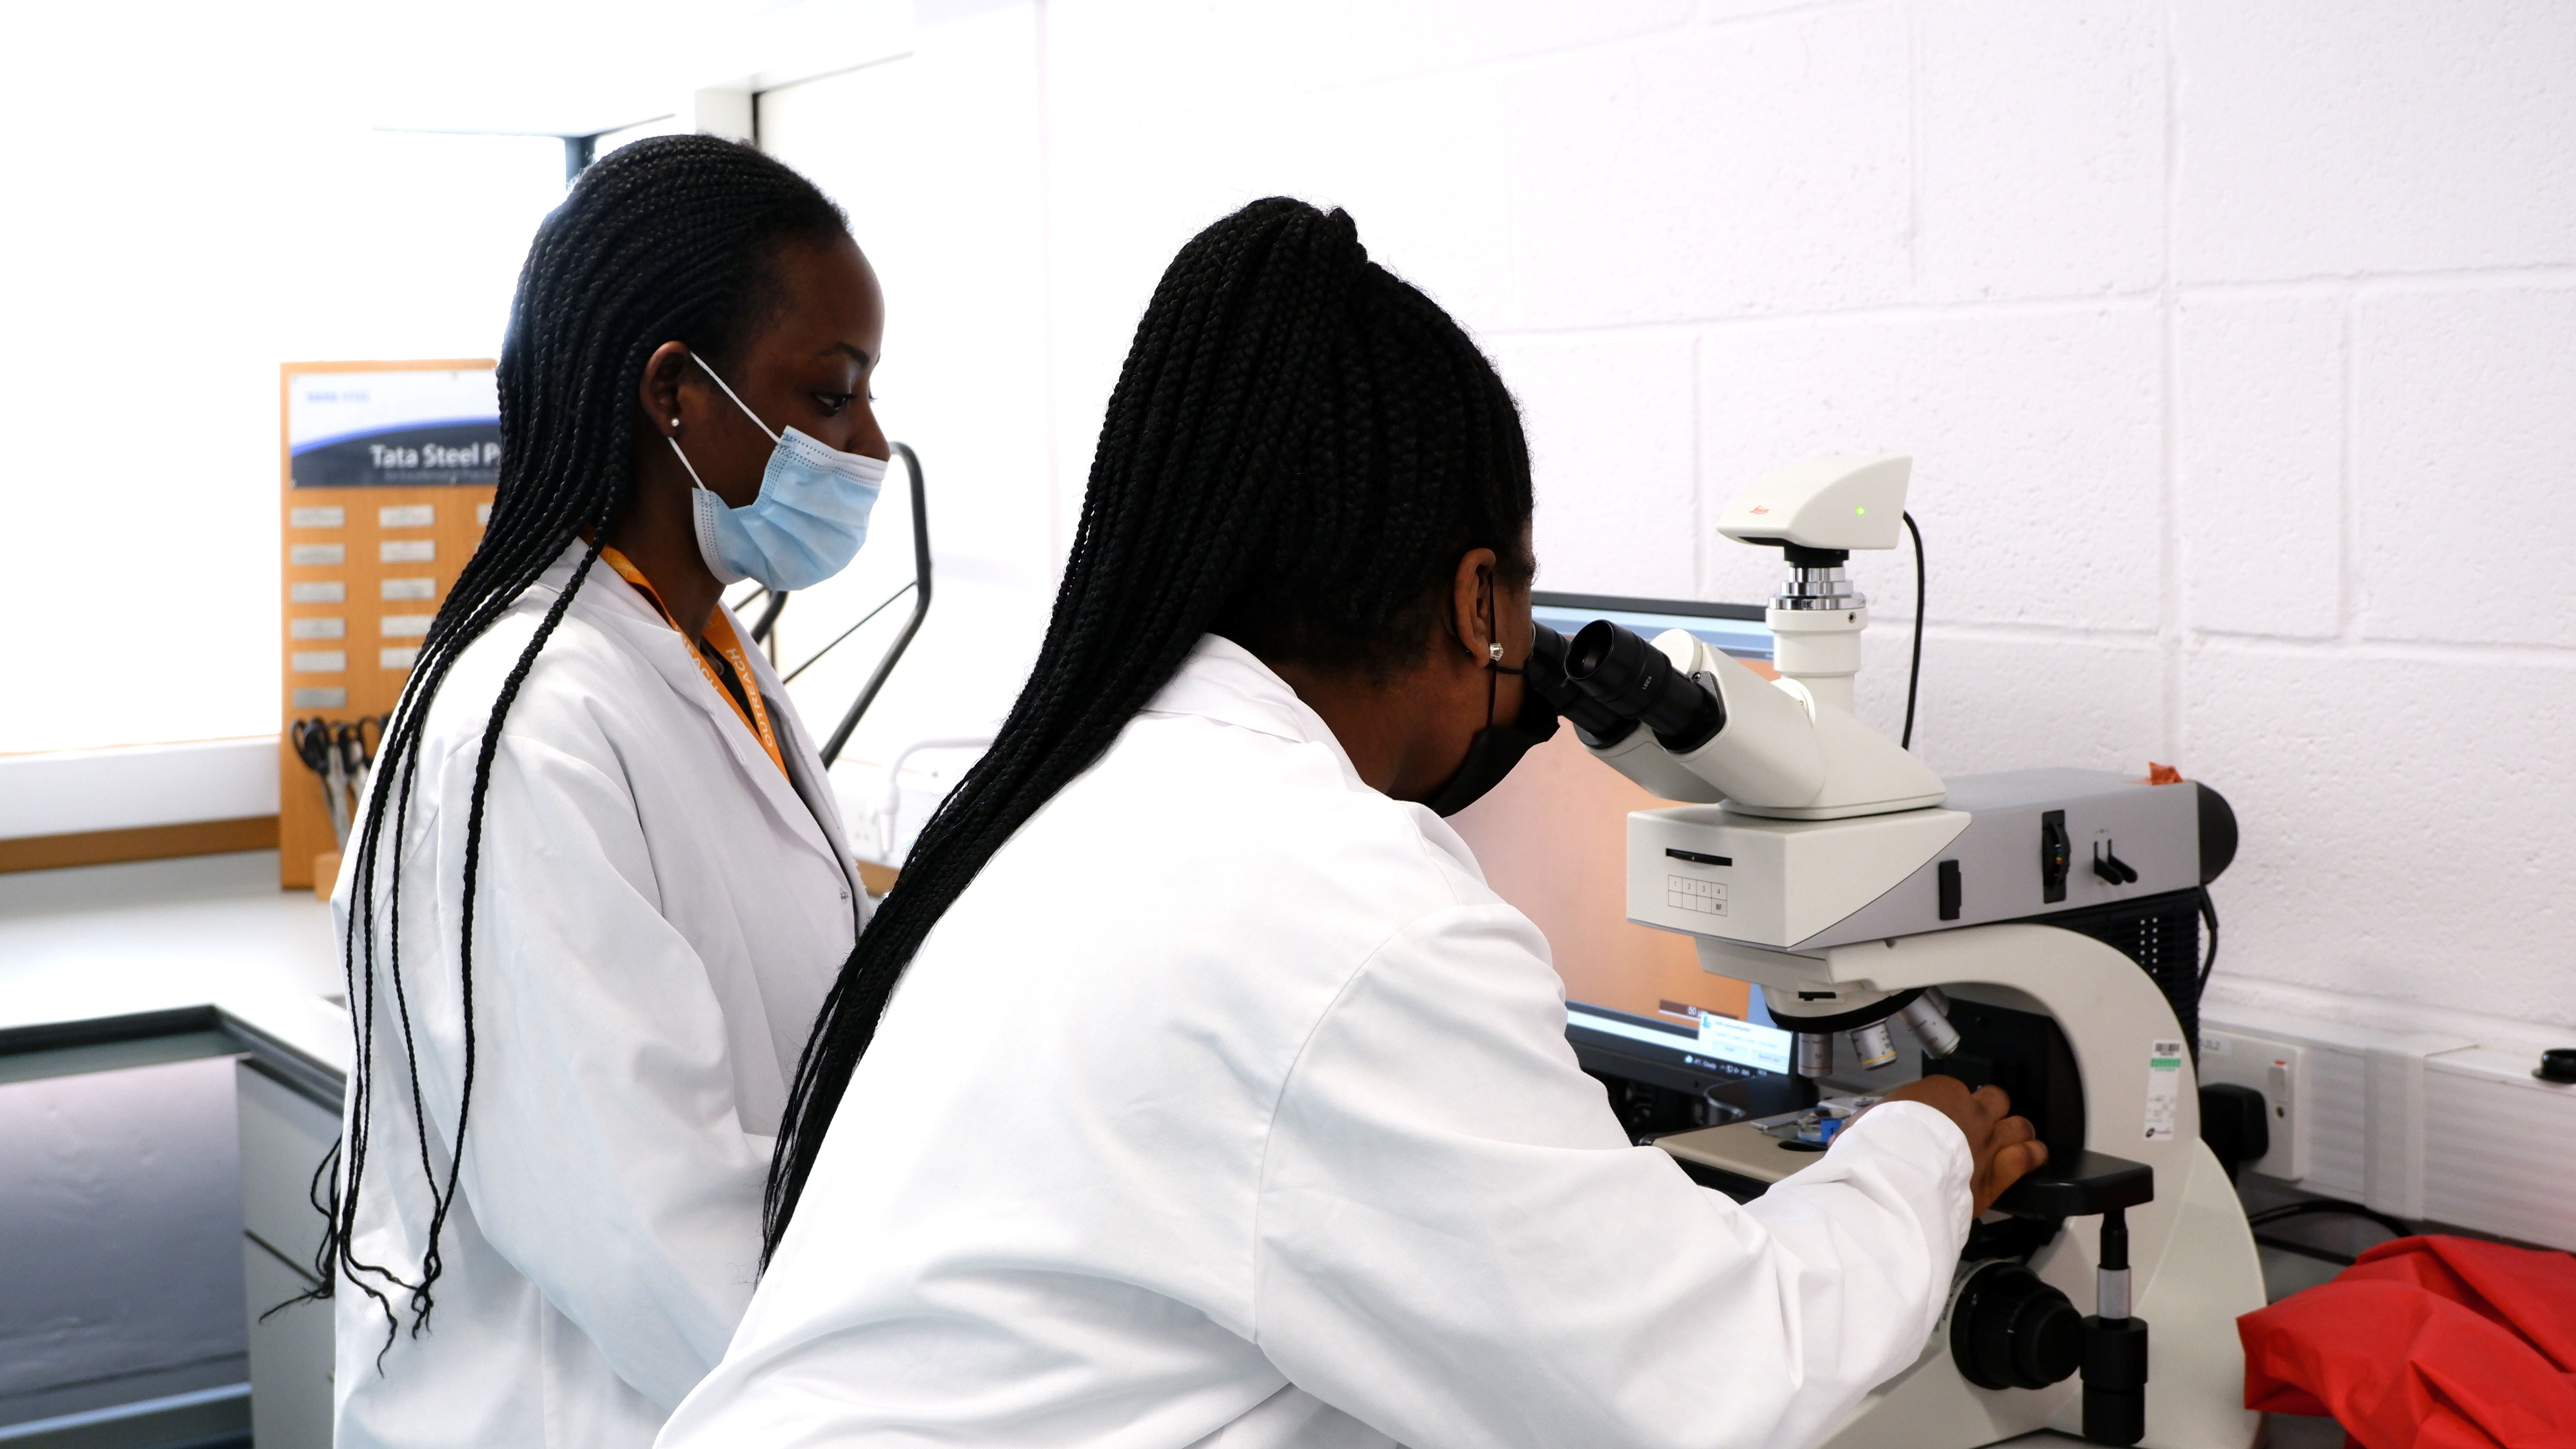 a photo of two girls wearing lab coats looking at a microscope